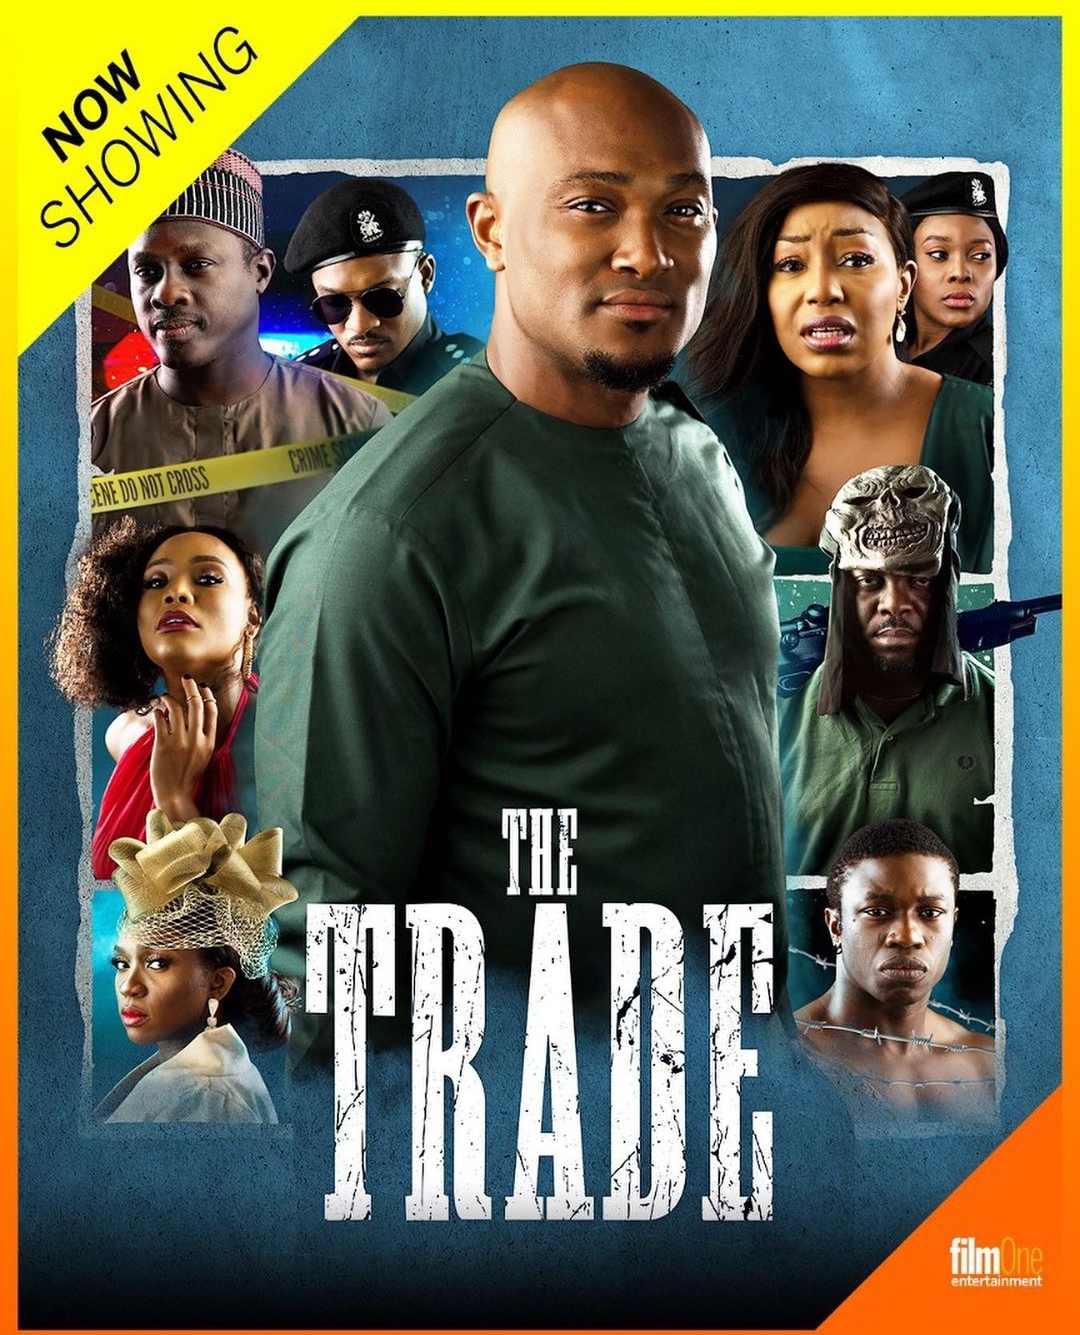 Movie Review: The Trade